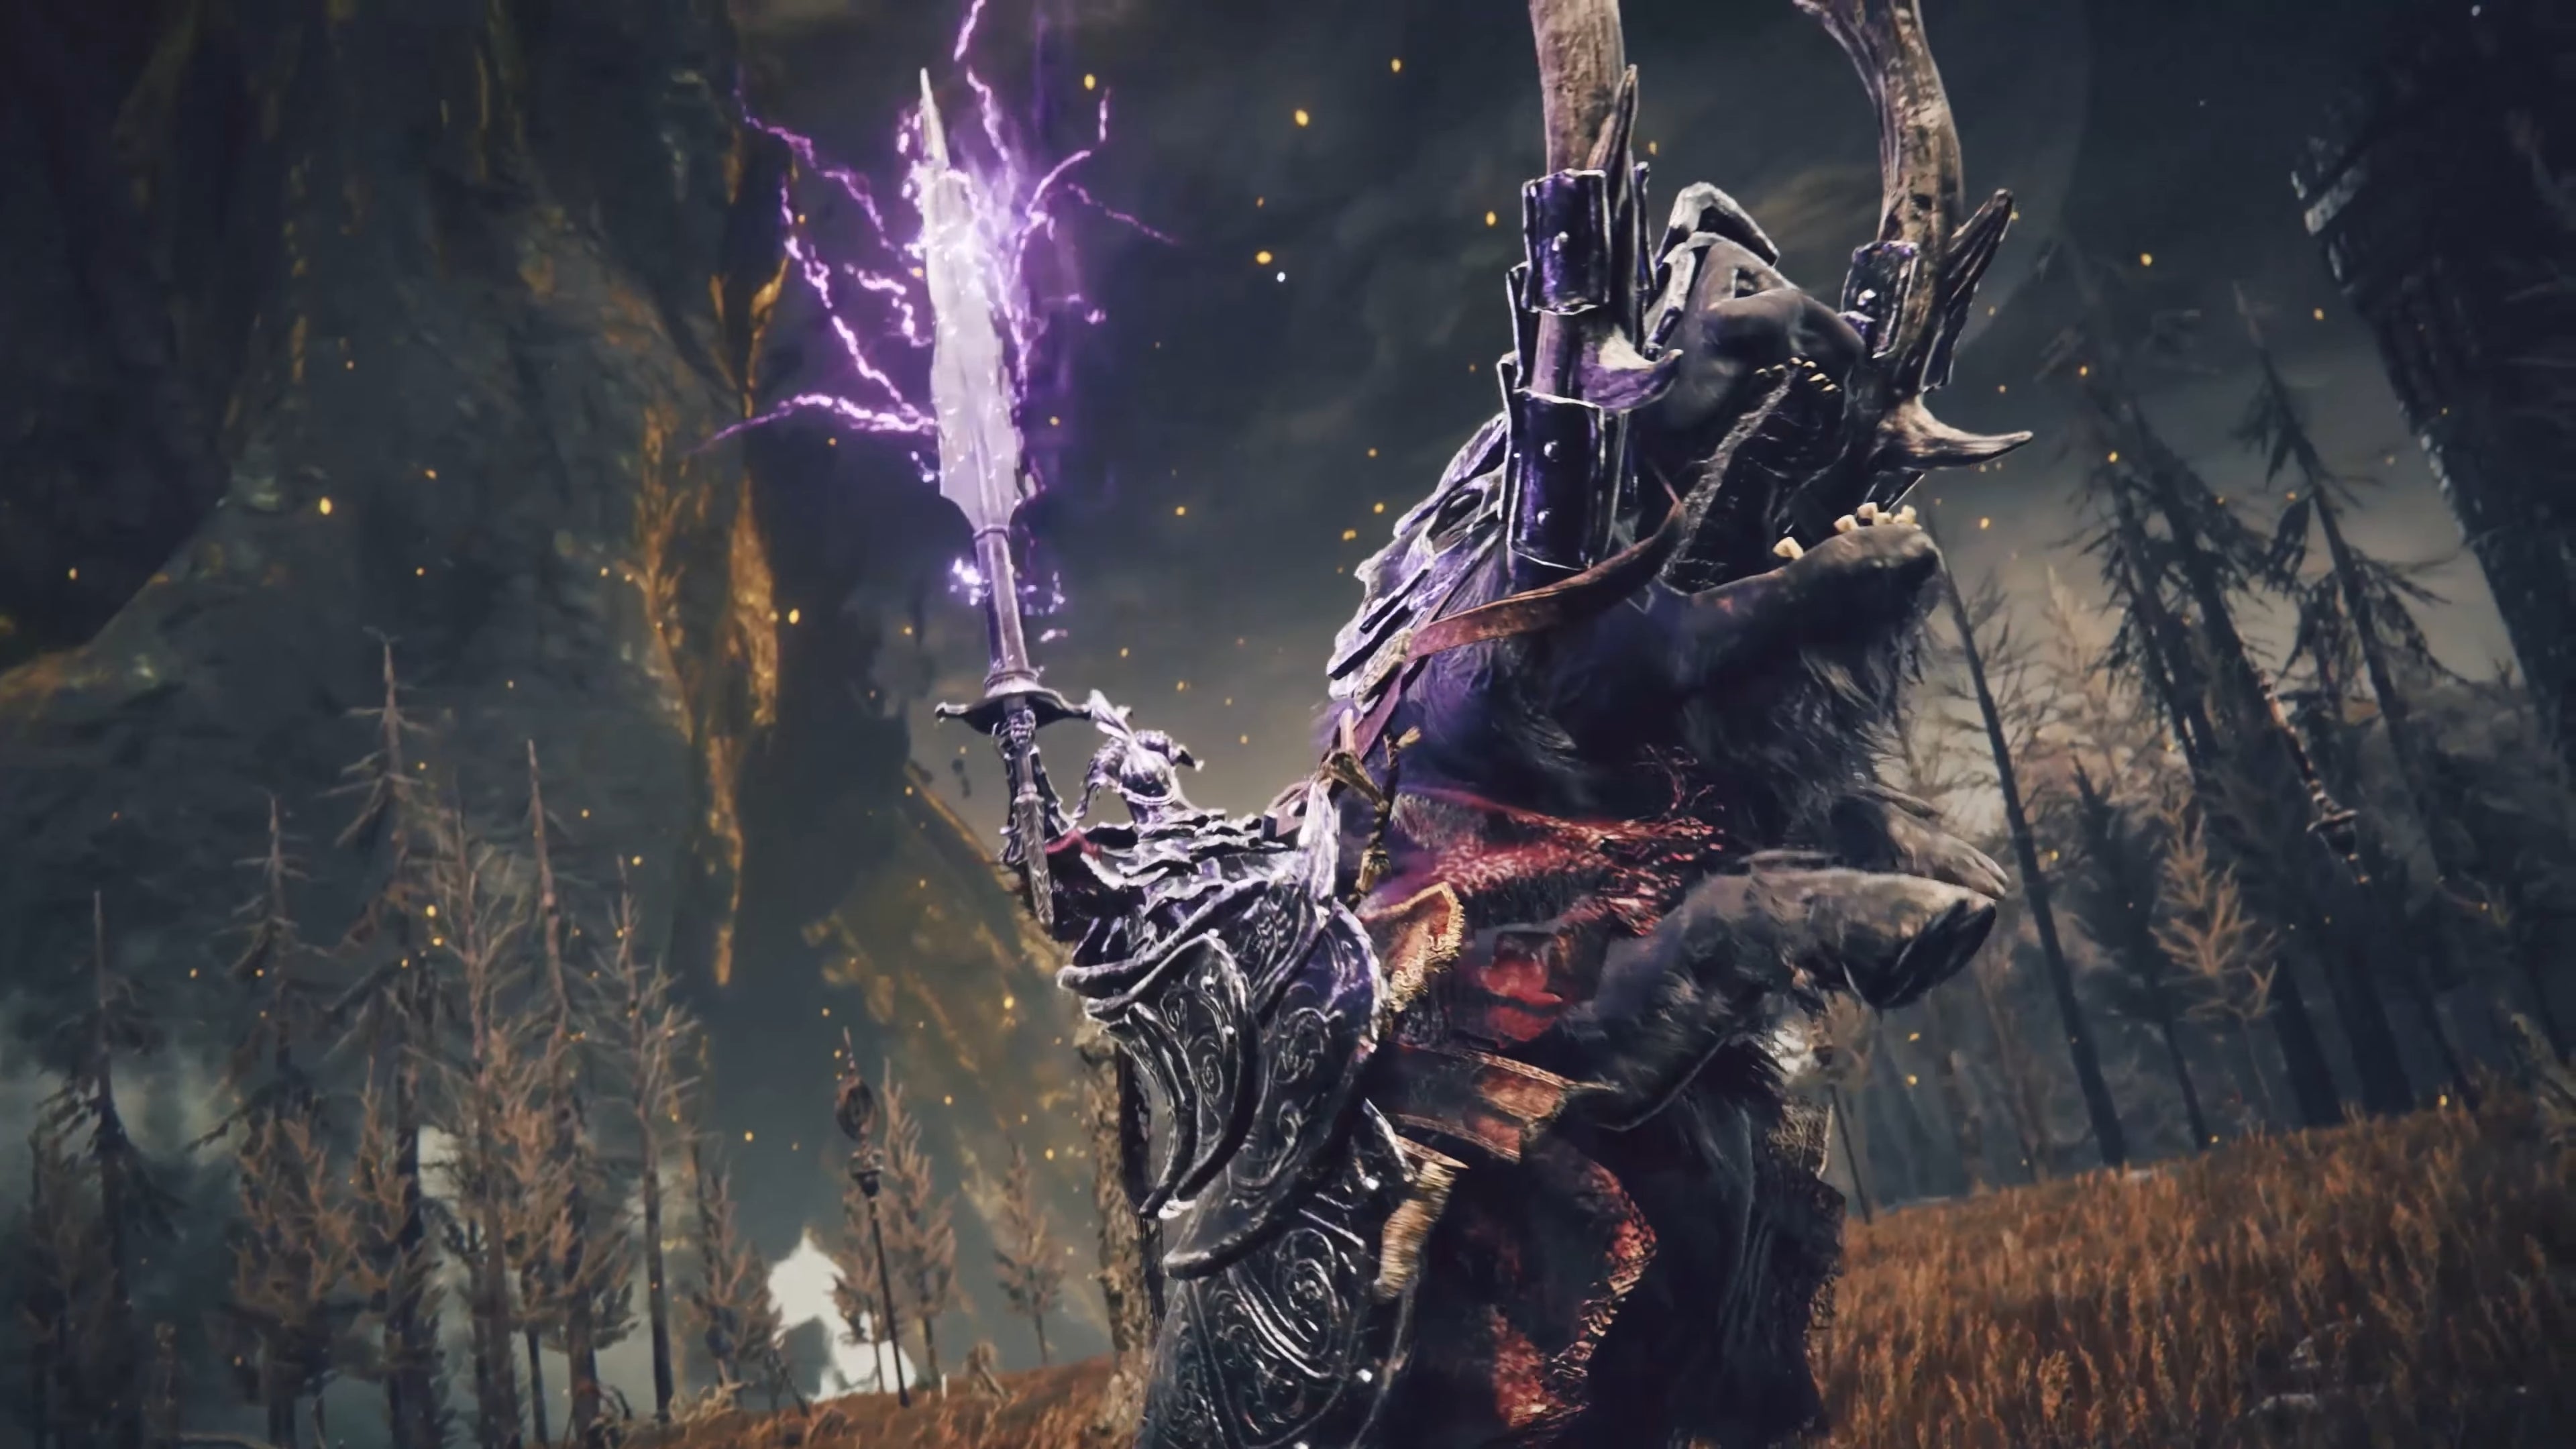 No more Elden Ring DLC after Shadow Of The Erdtree, says Souls boss Miyazaki